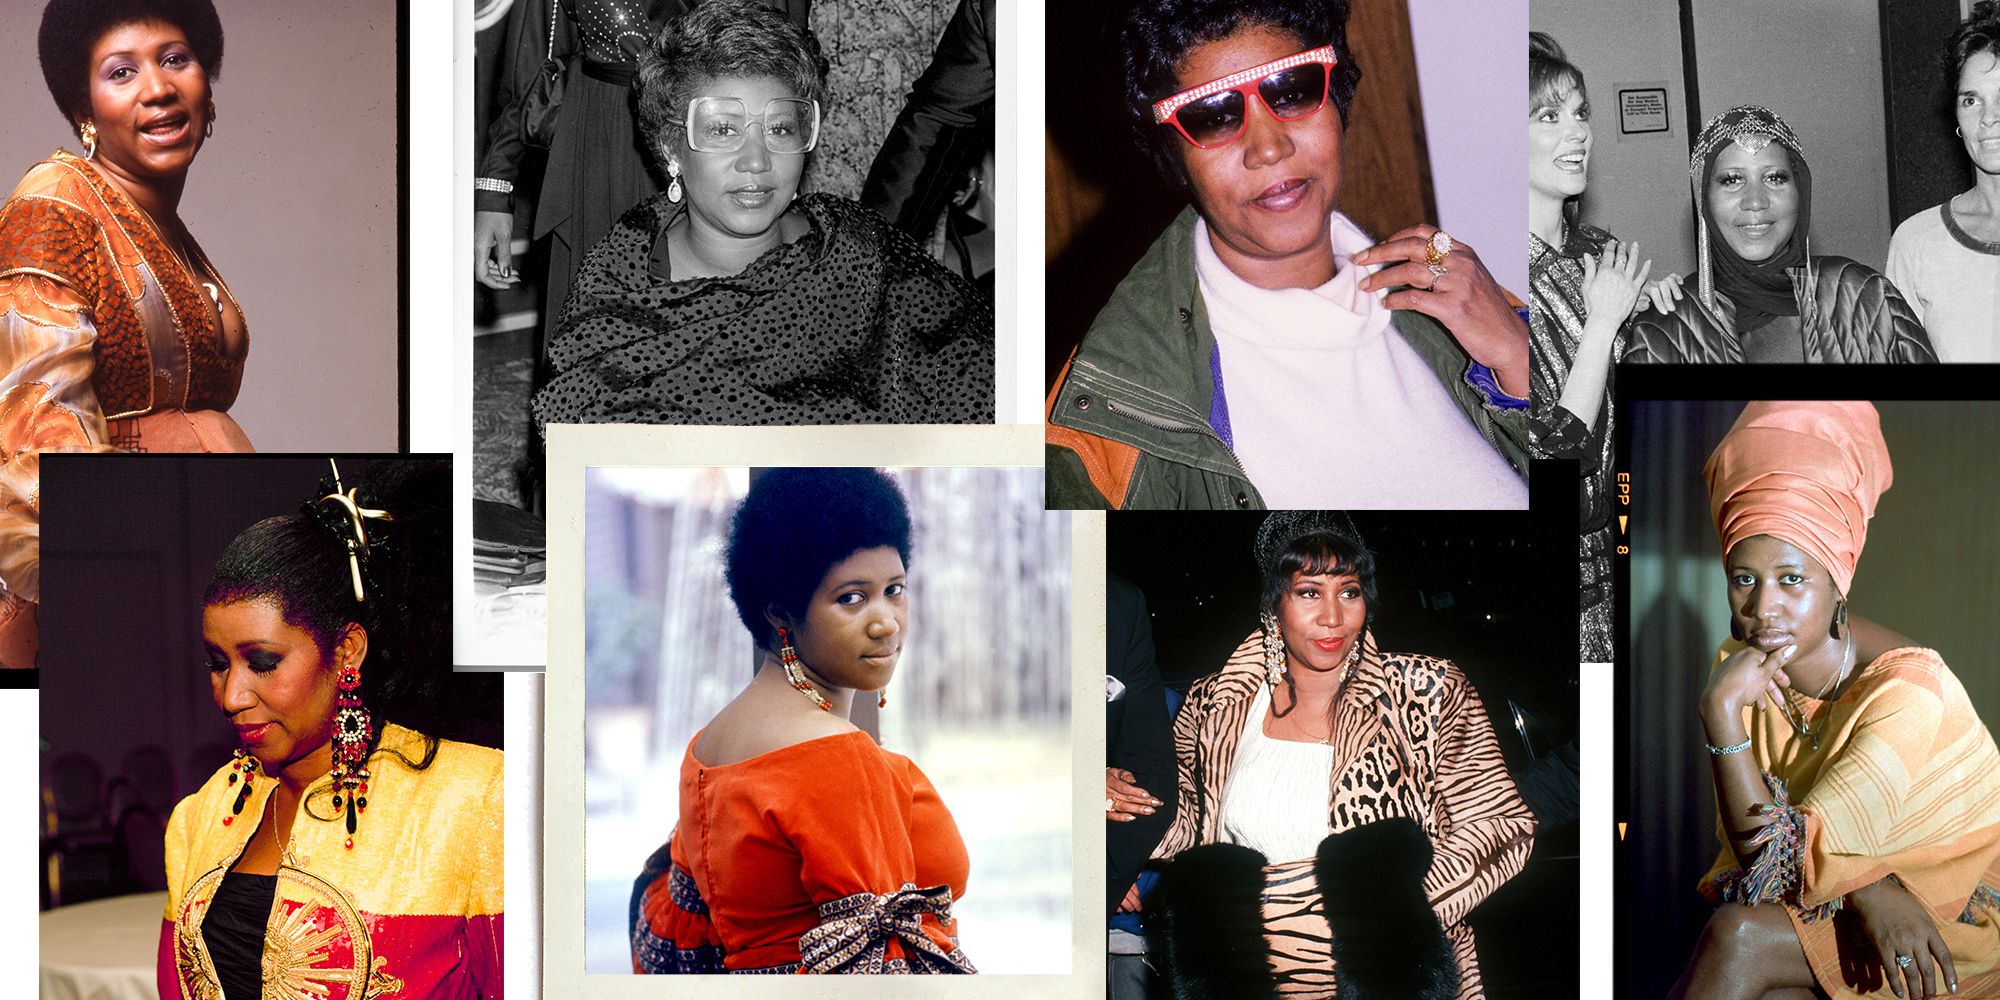 The Queen of Soul's Style Through the Years